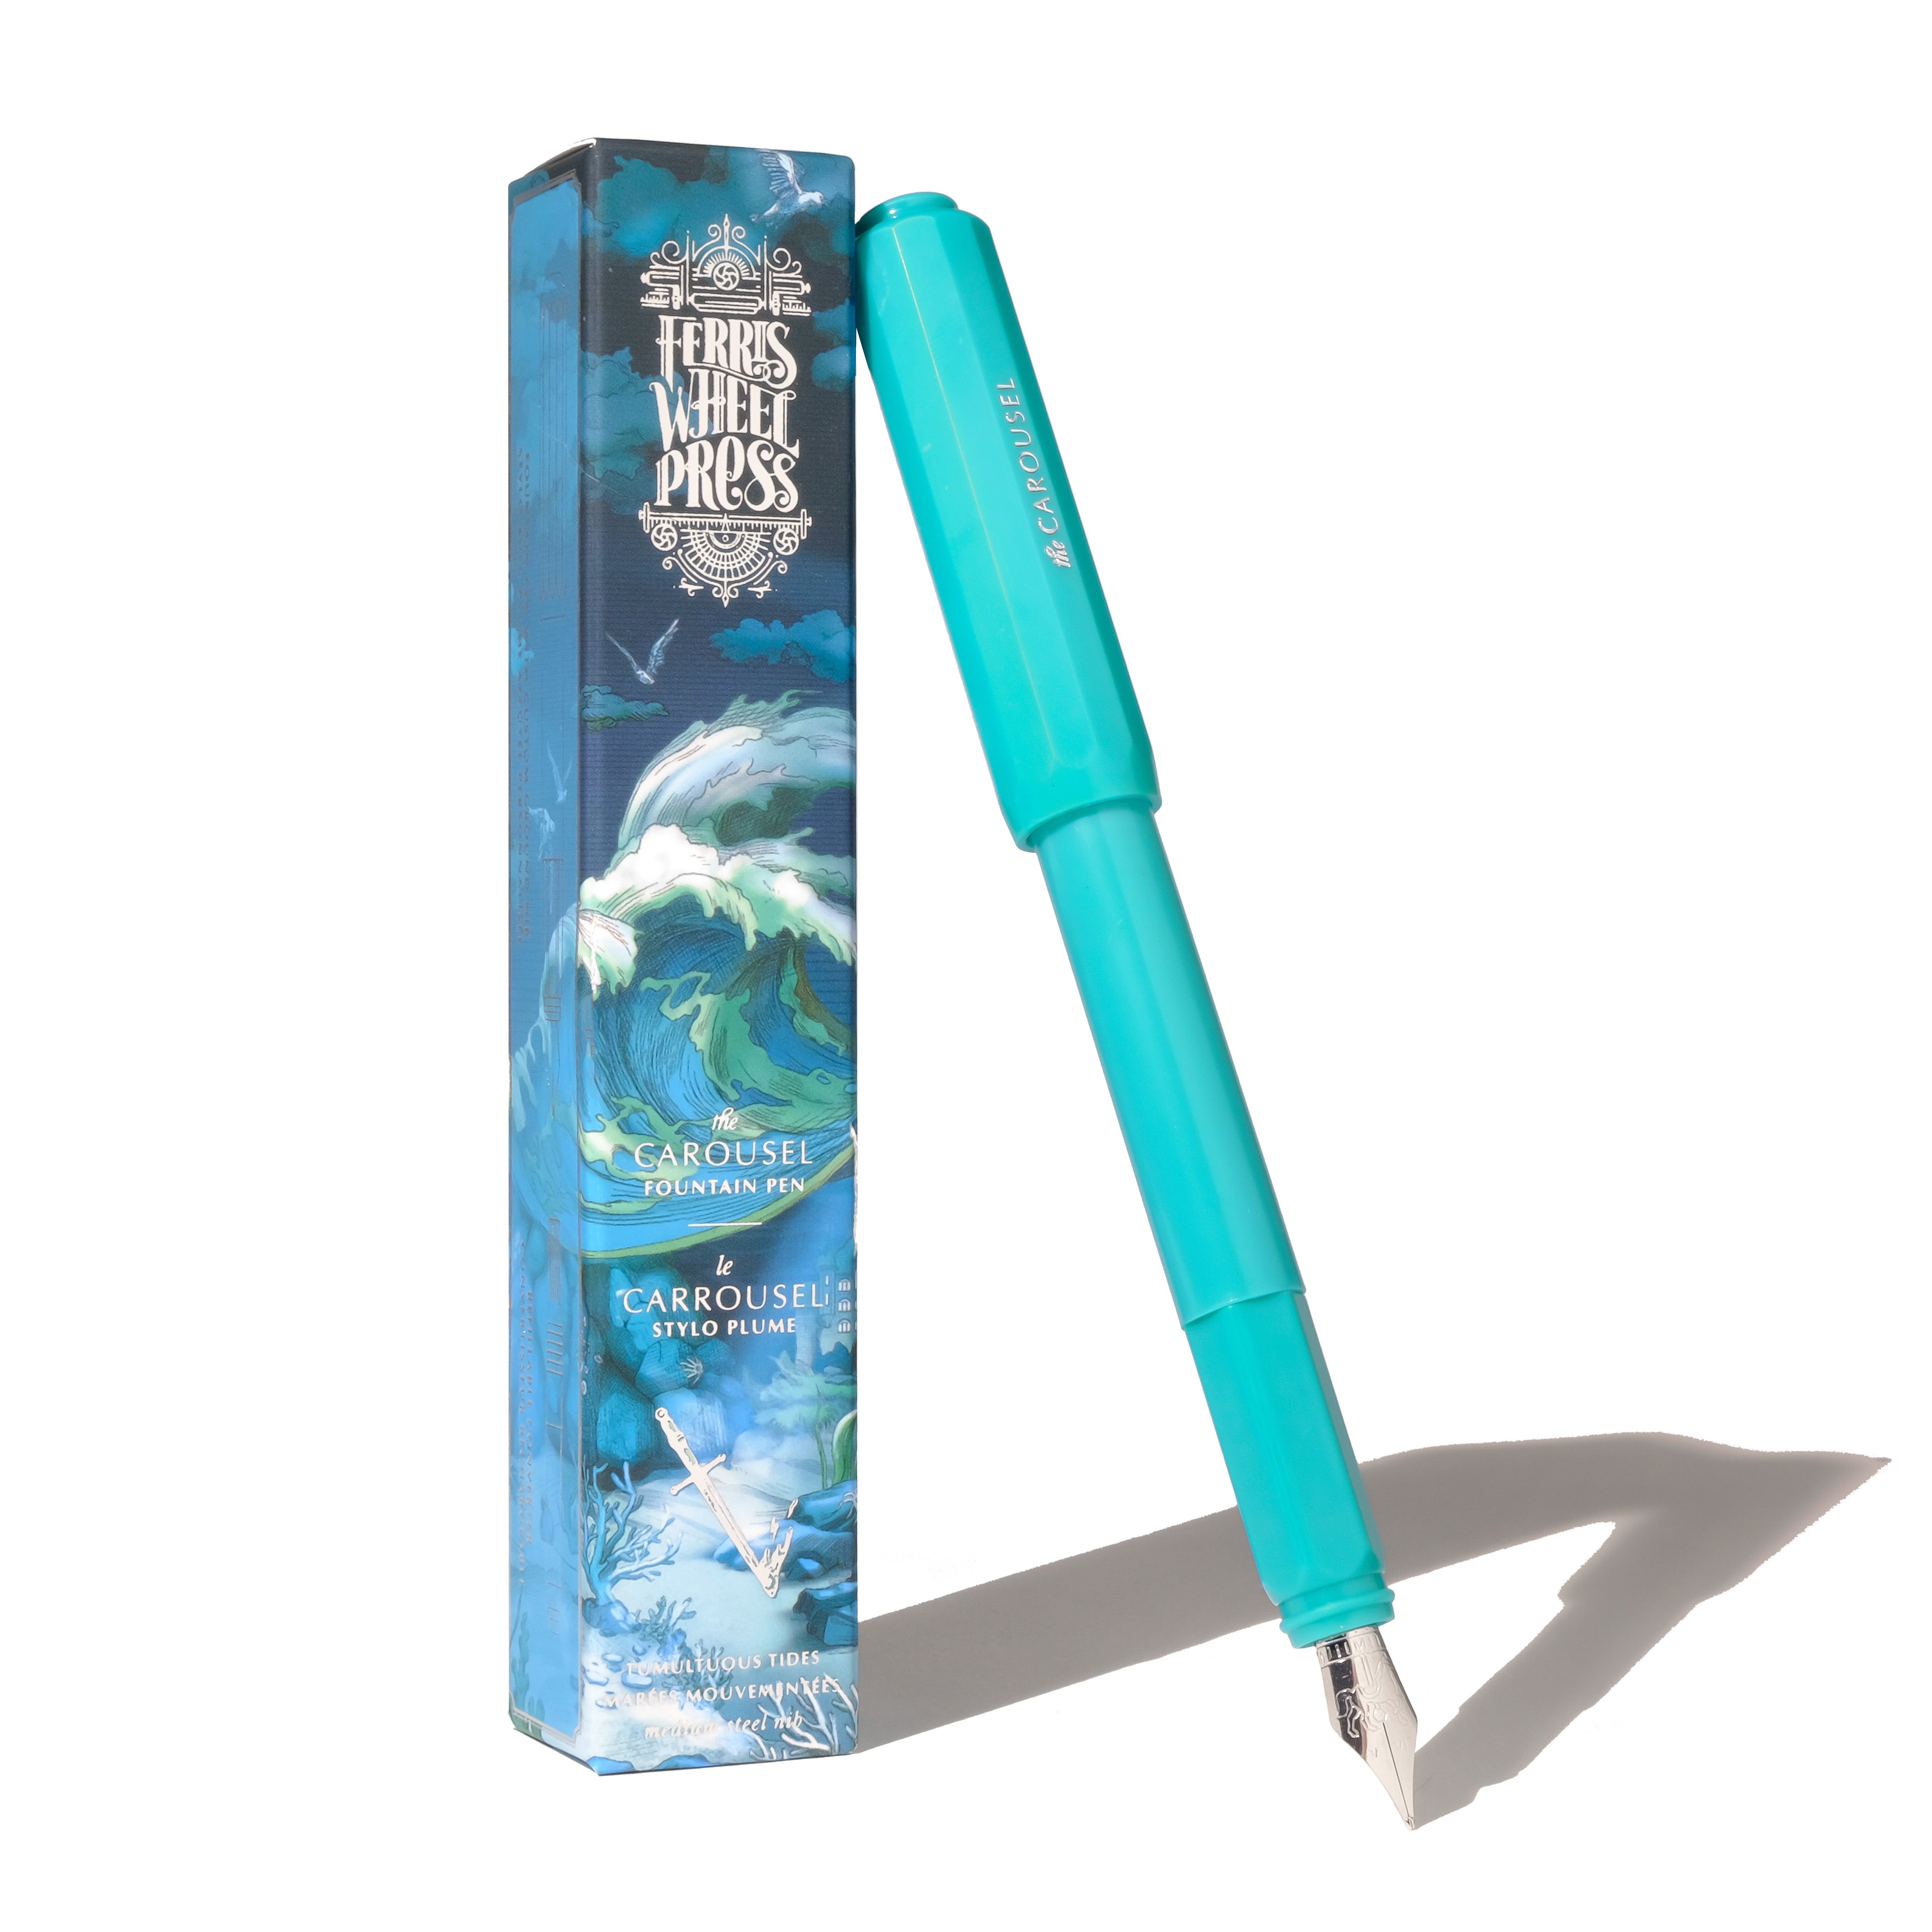 Limited Edition - The Carousel Fountain Pen - Tumultuous Tides